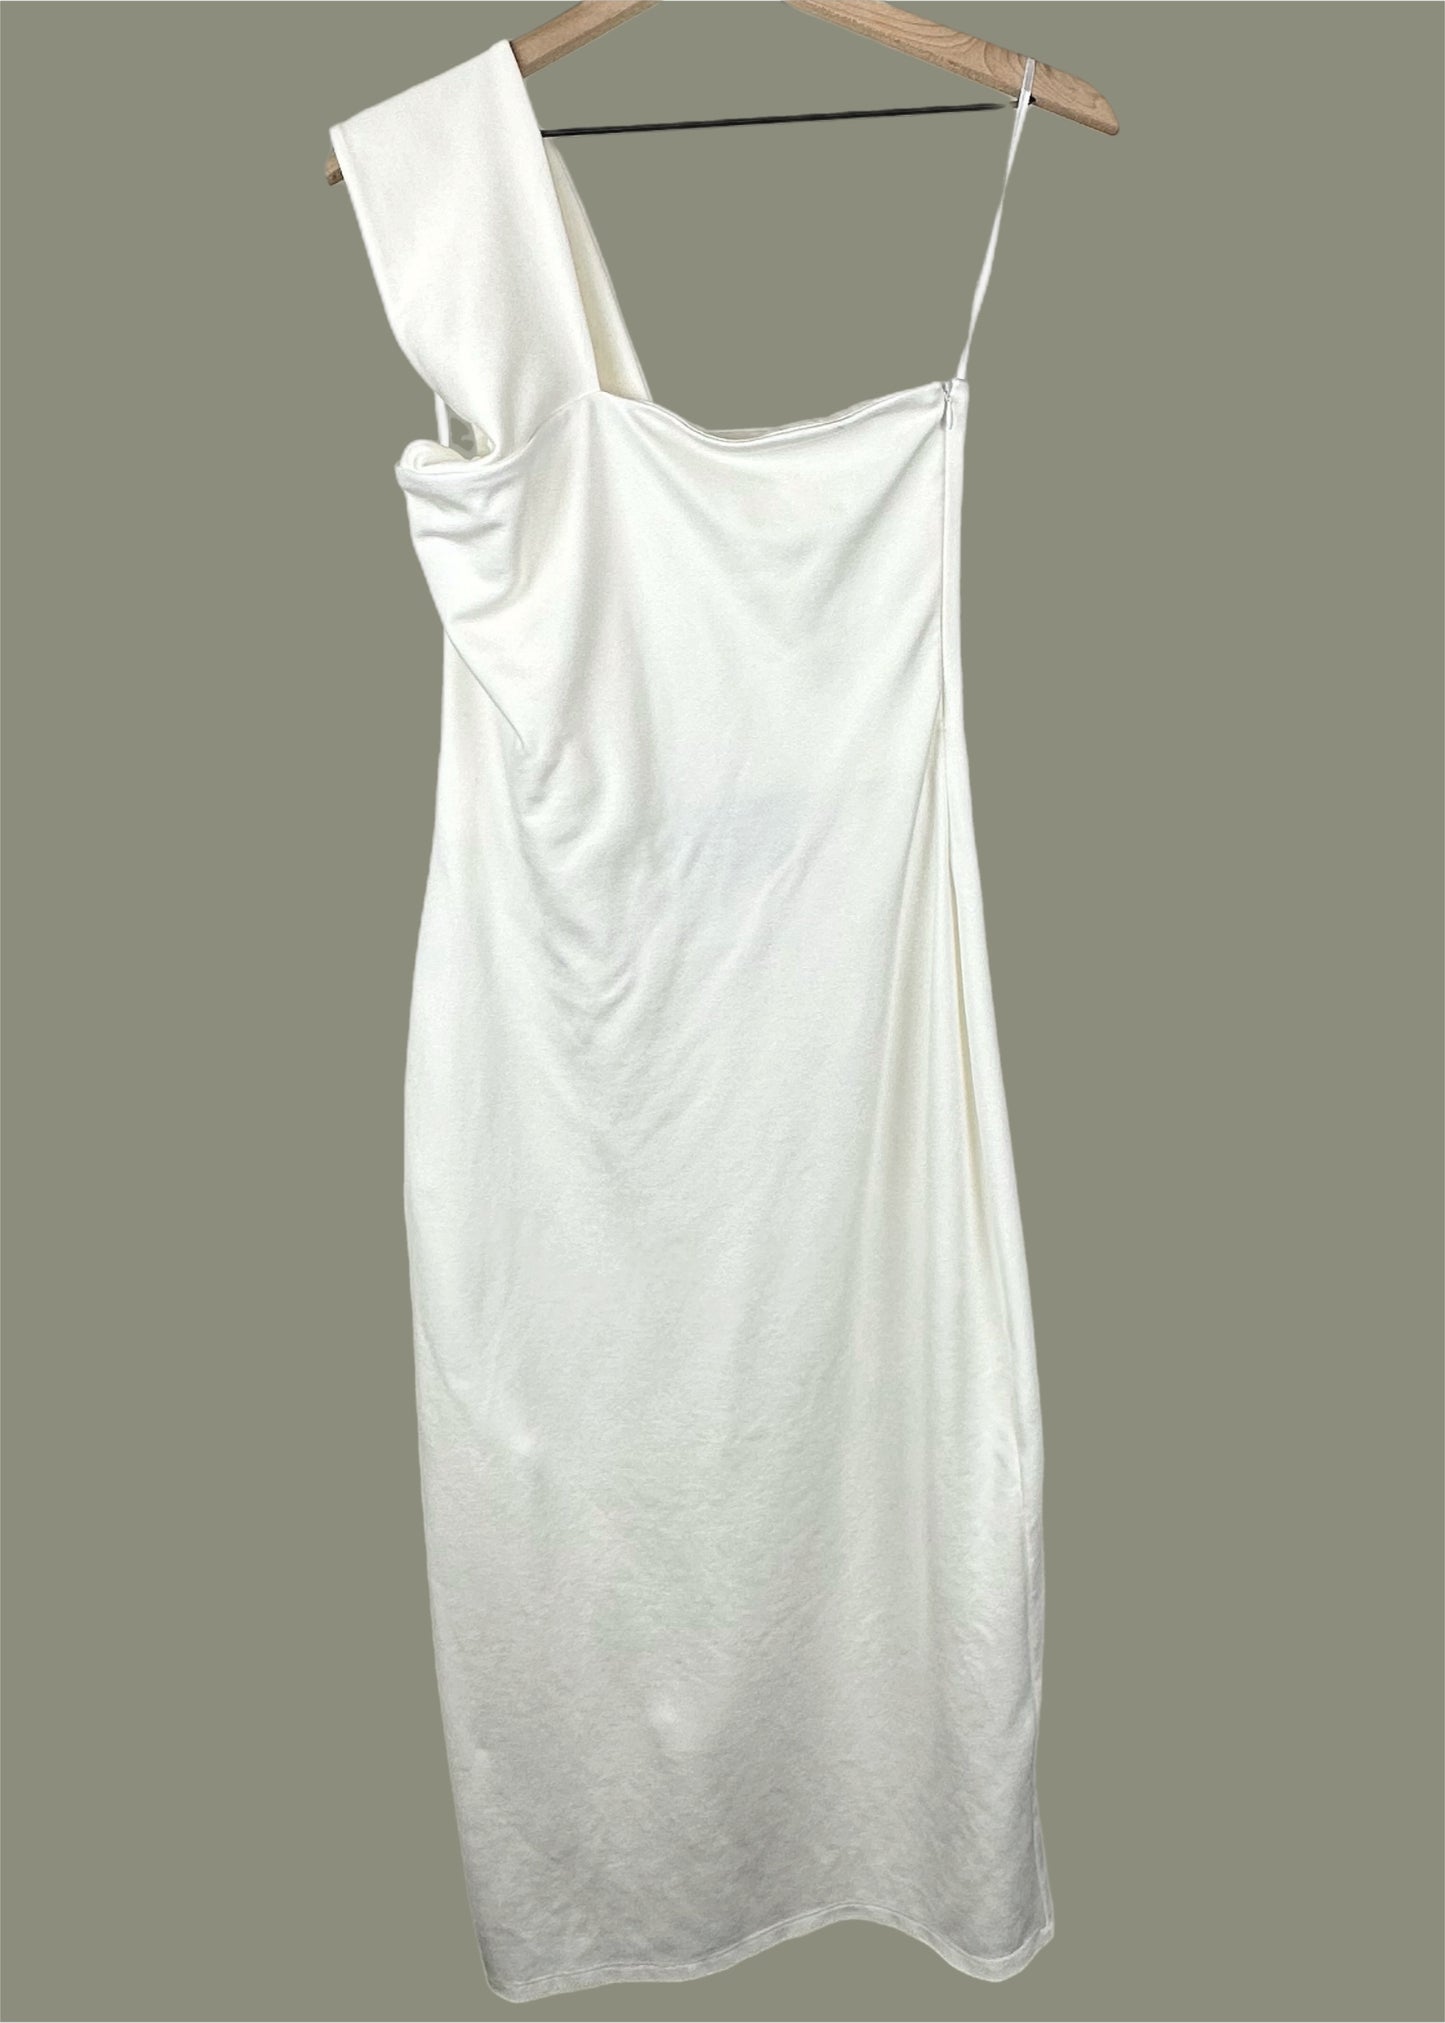 Off White Caterina Dress by Marcella